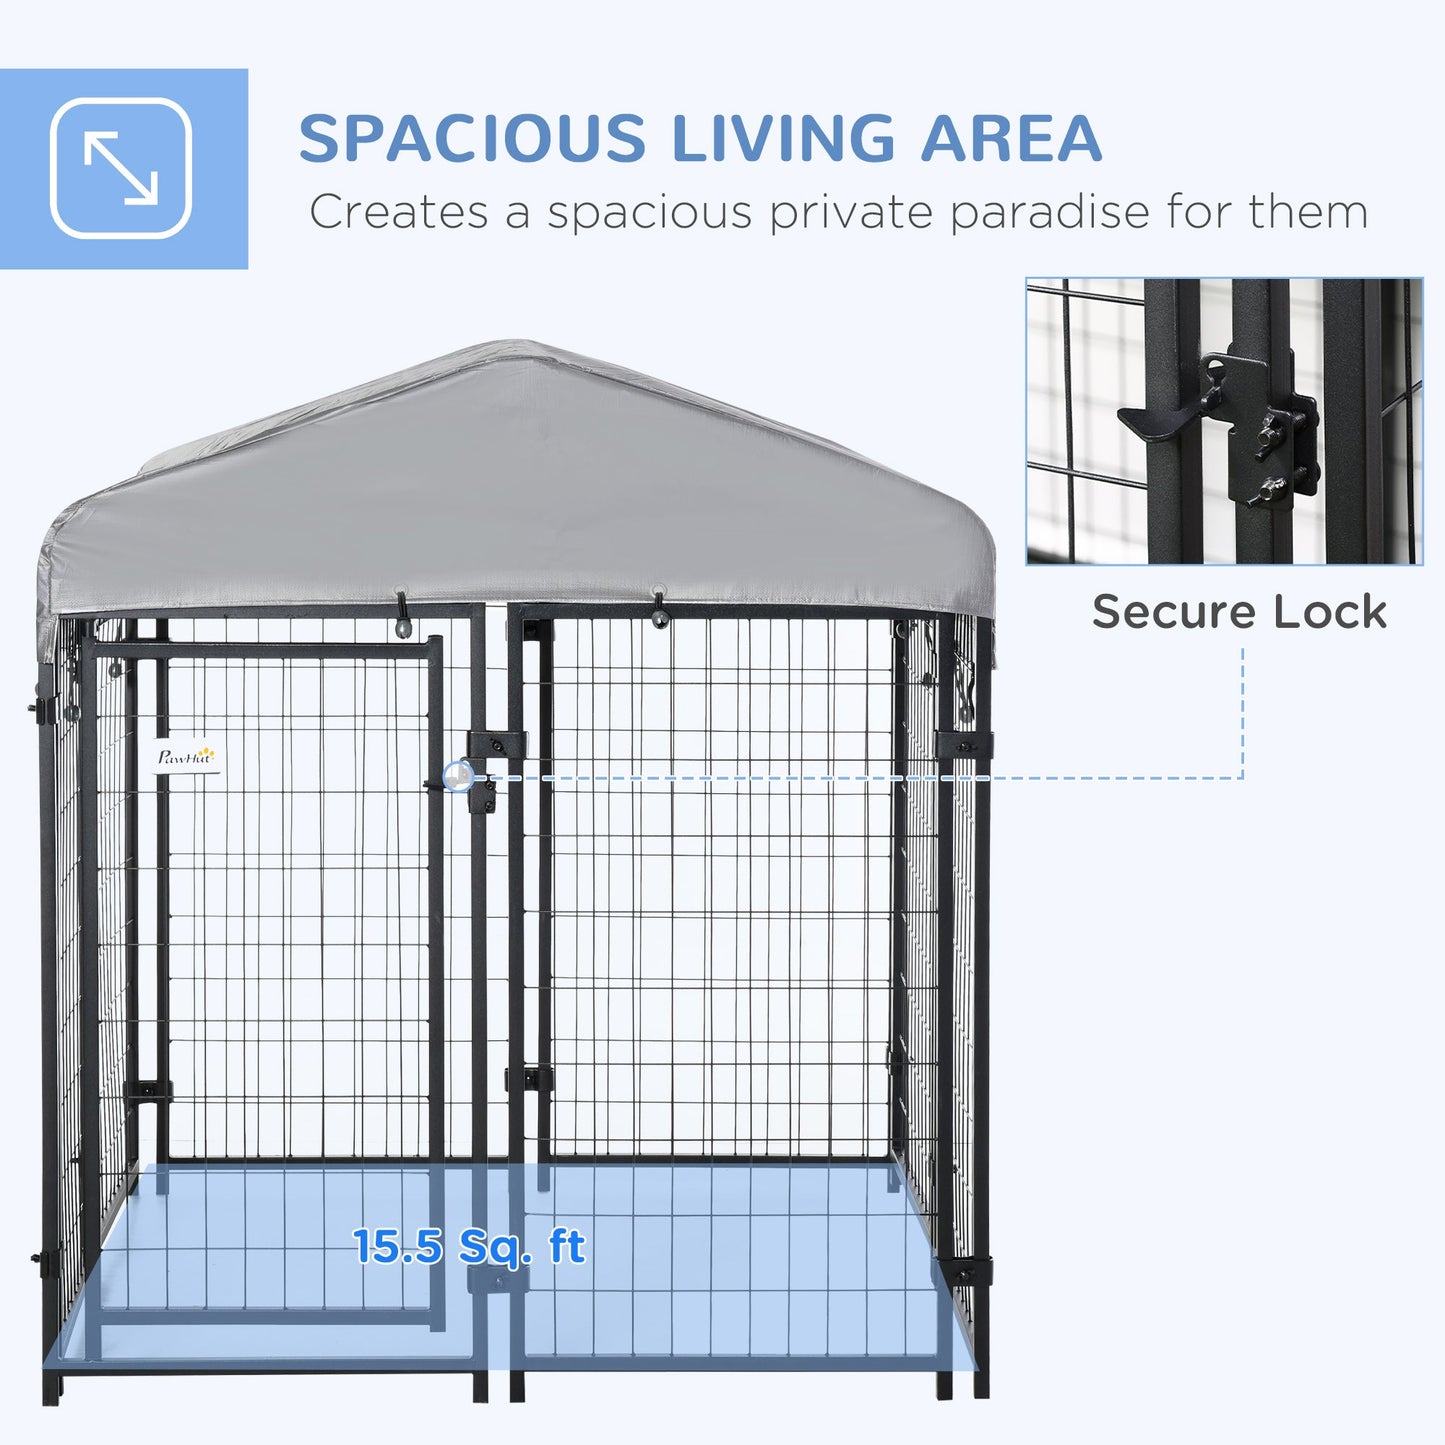 Outdoor and Garden-Medium-Sized Outdoor Dog Kennel, Dog Crate Galvanized Steel Fence with UV-Resistant Oxford Cloth Roof & Secure Lock, 47.25" x 47.25" x 54.25" - Outdoor Style Company